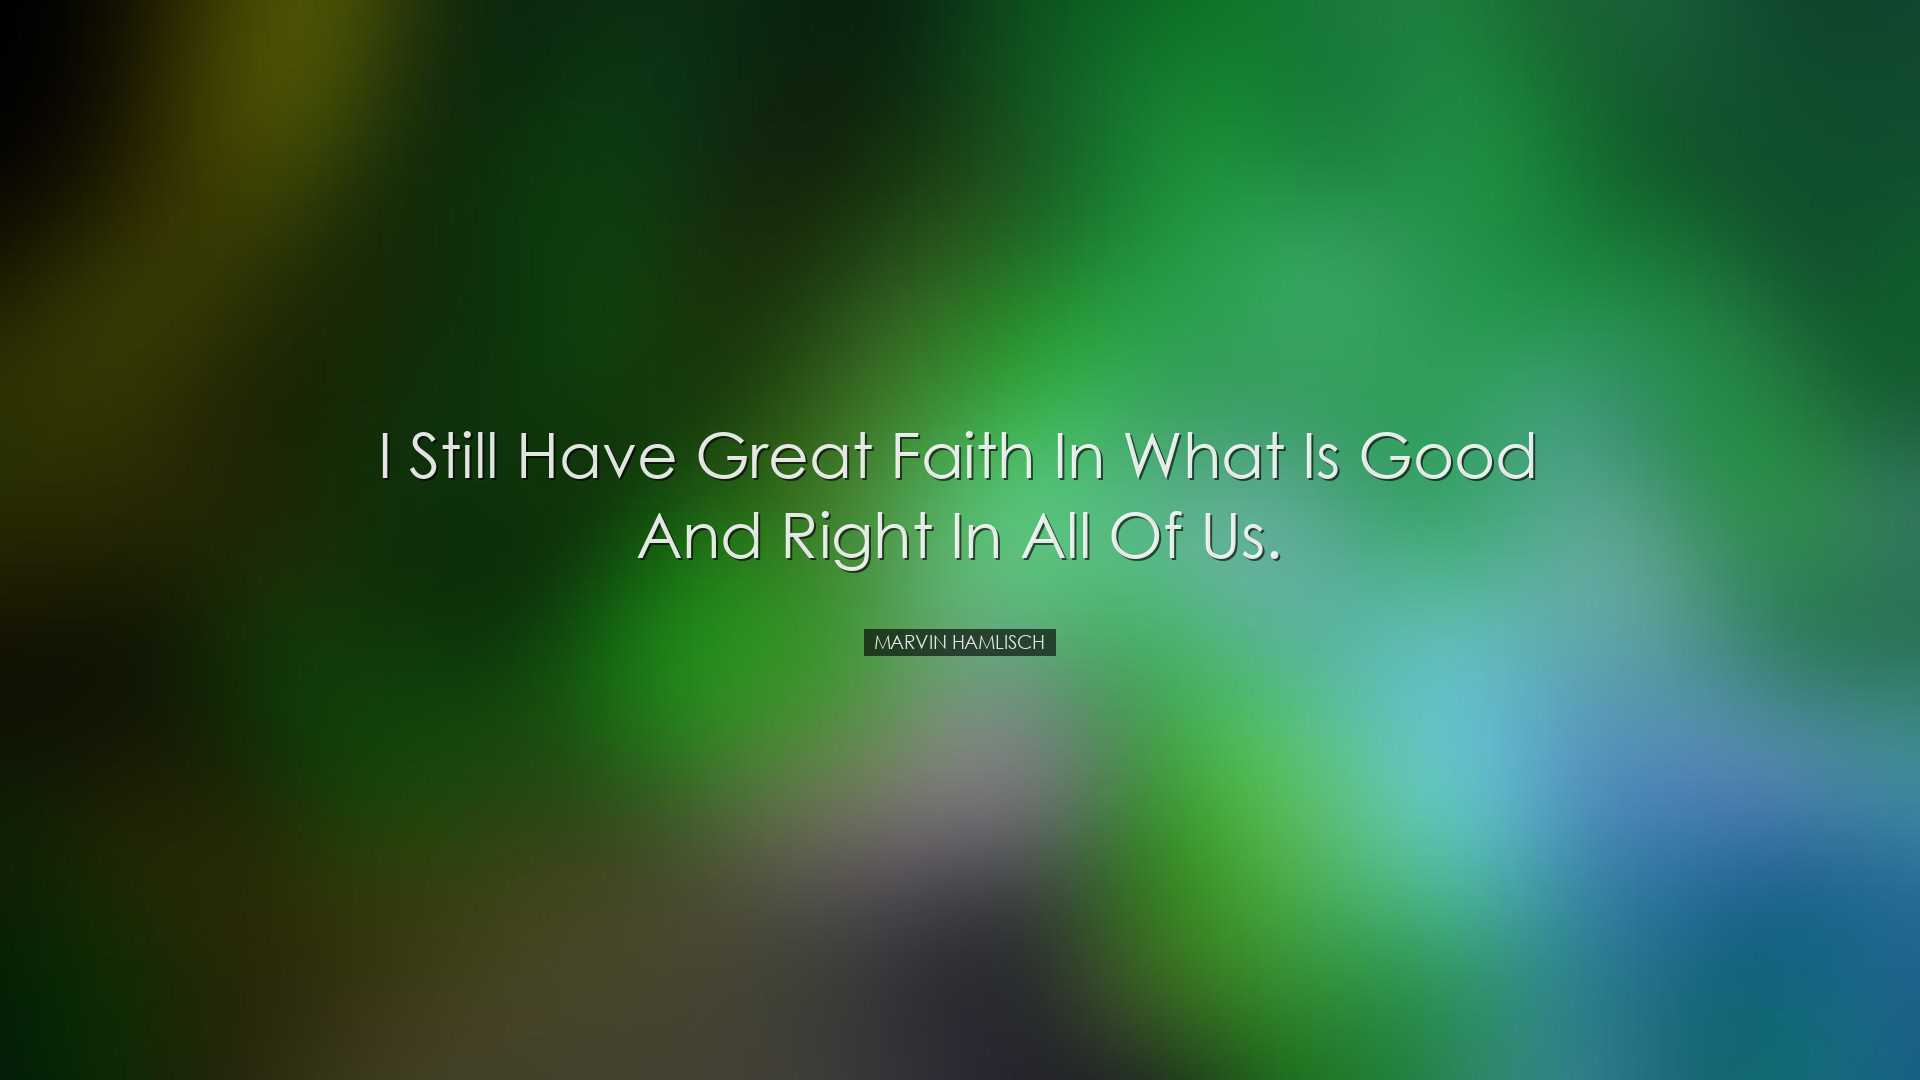 I still have great faith in what is good and right in all of us. -